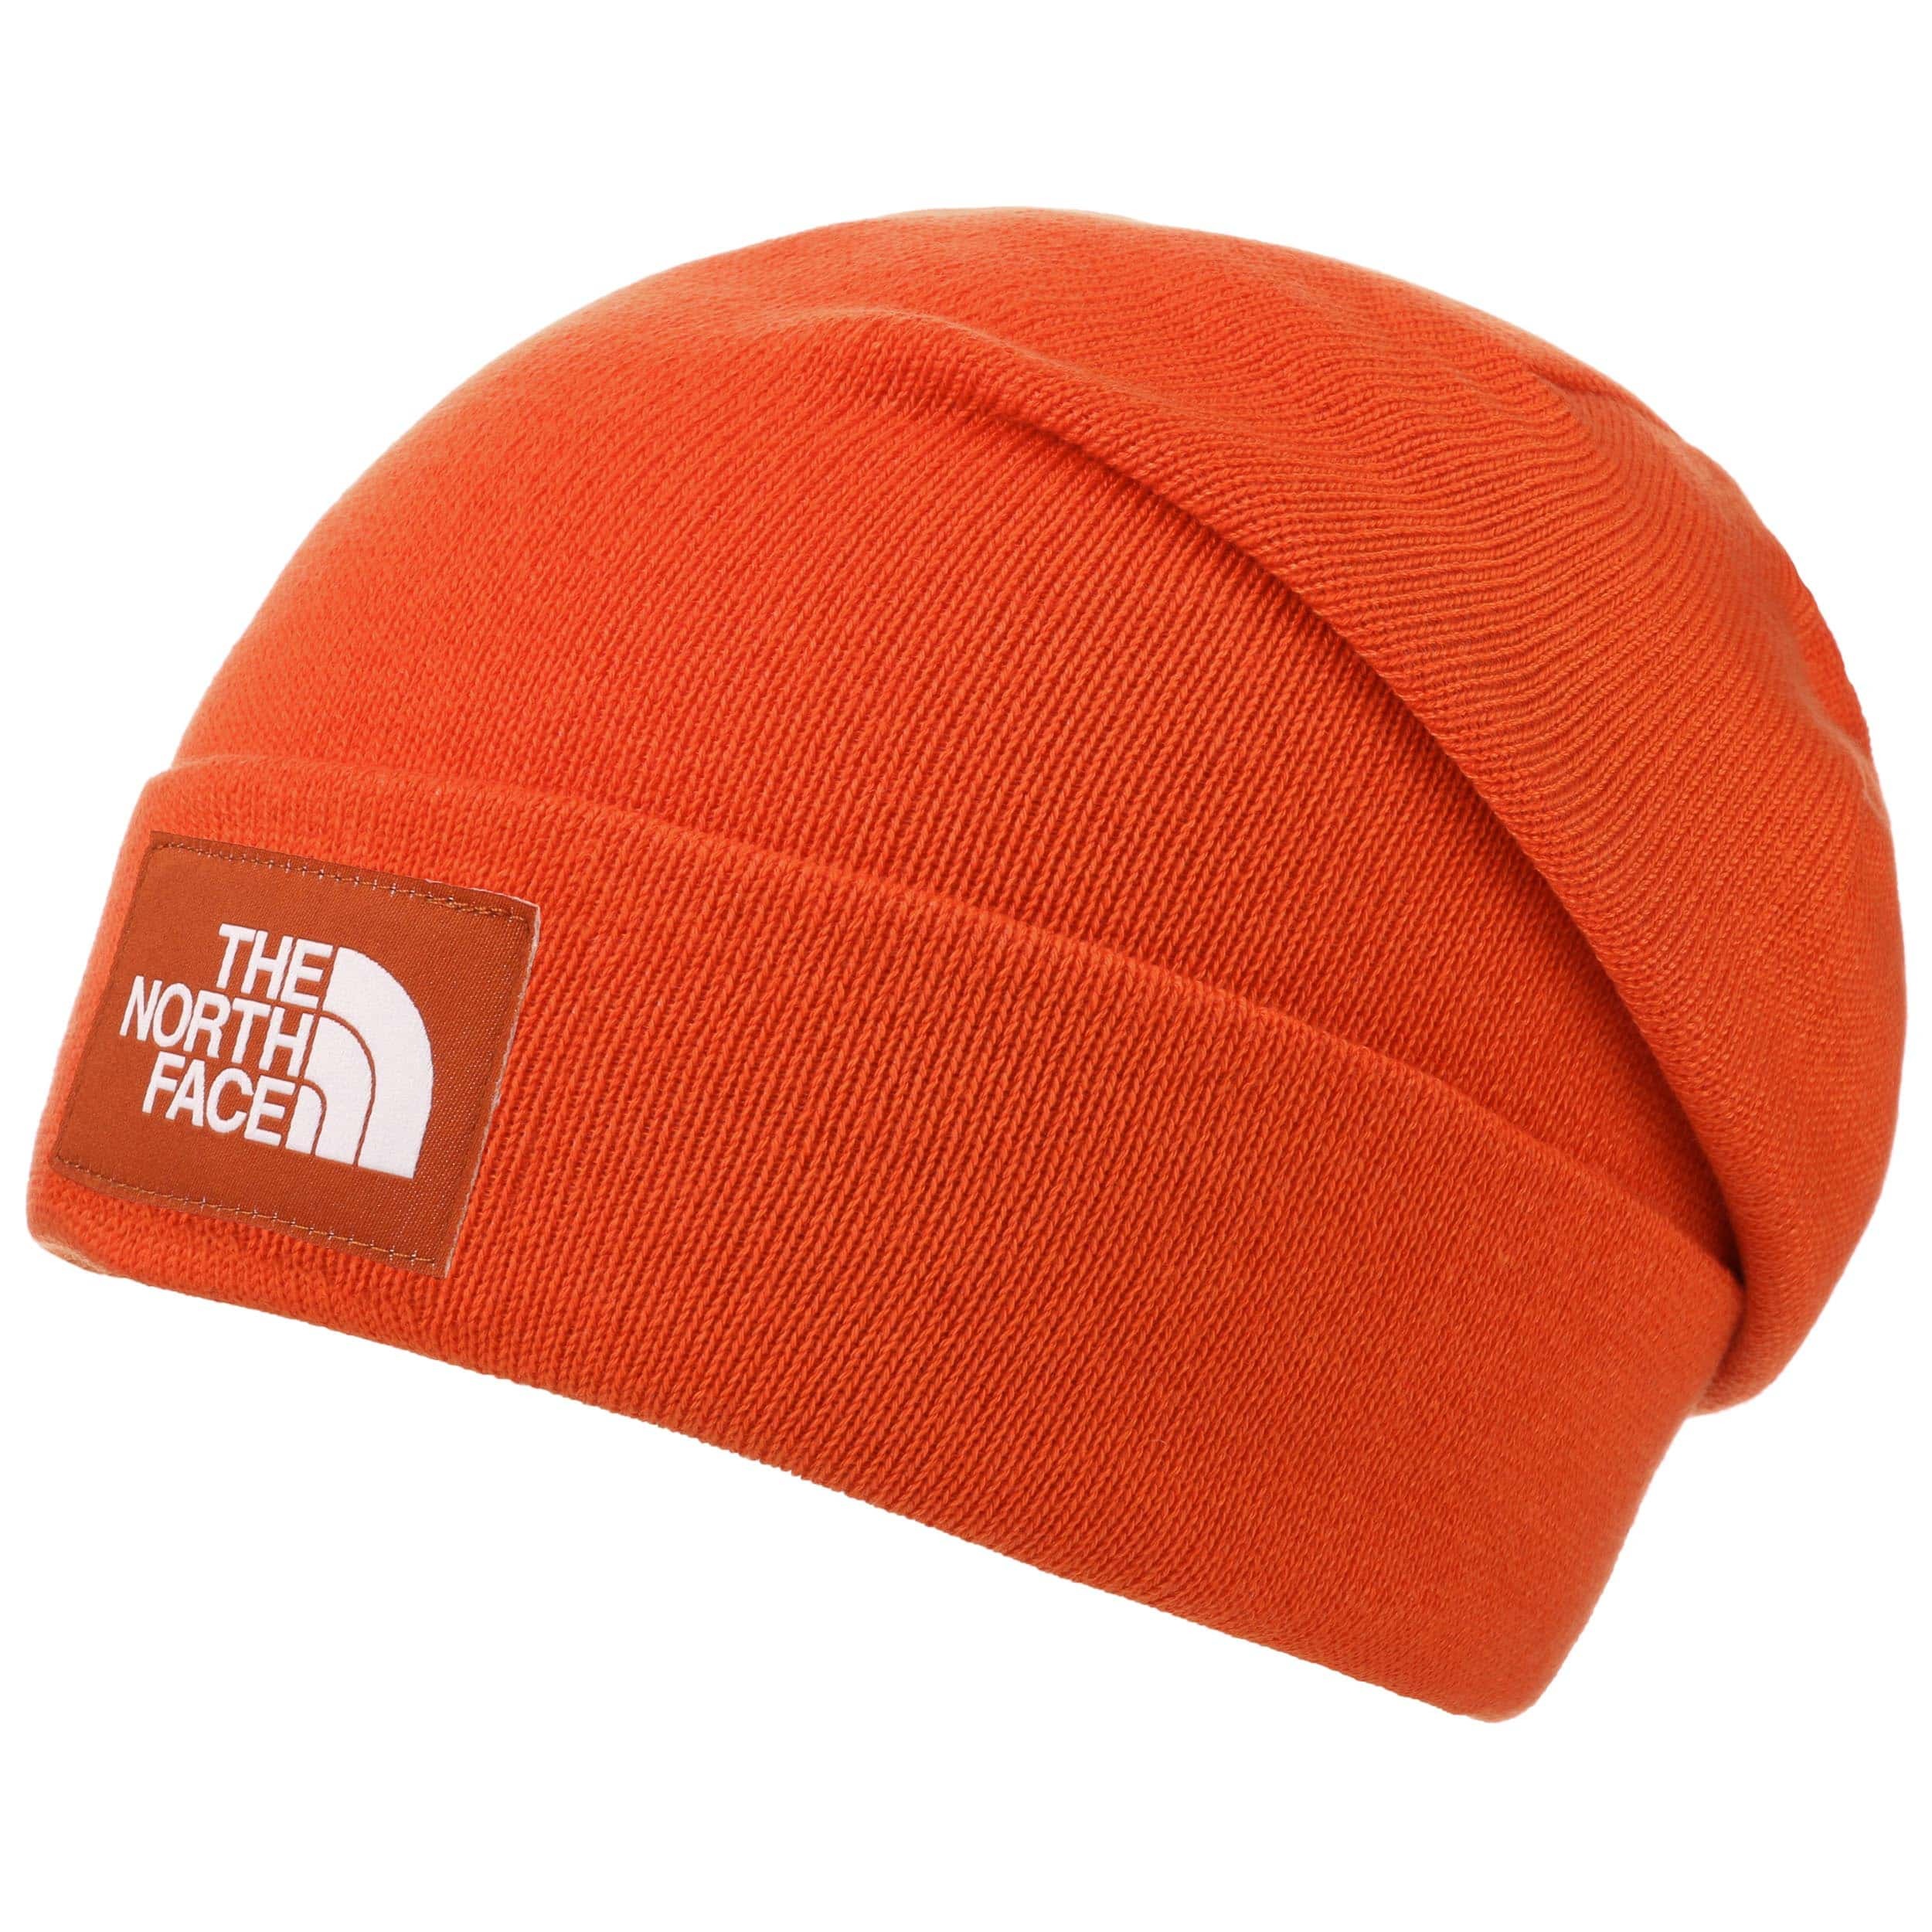 Recycled Cuffed Beanie by The North Face - 32,95